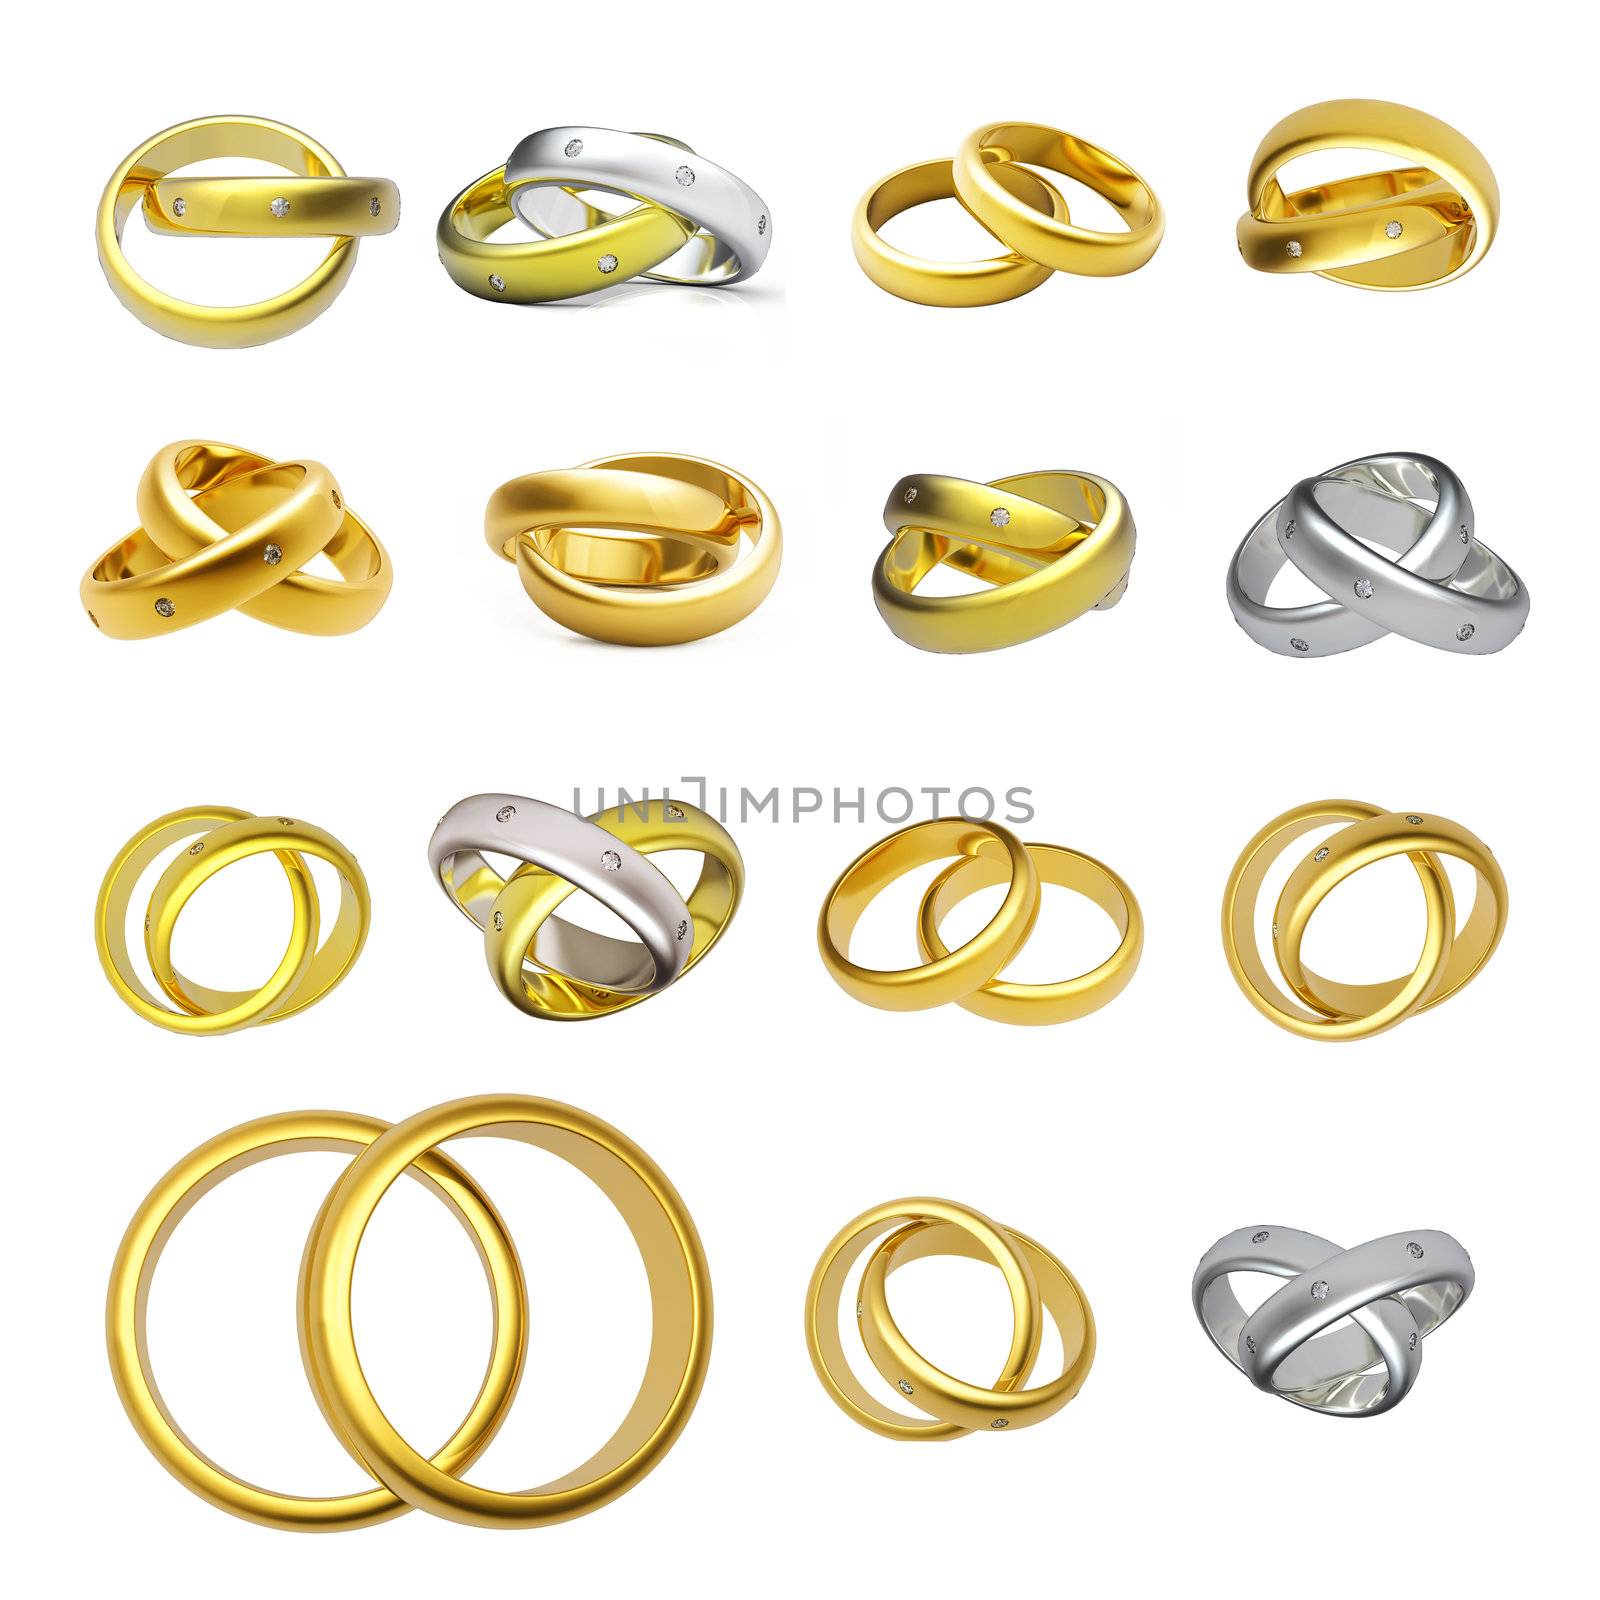 Collection of gold wedding rings  isolated on white background